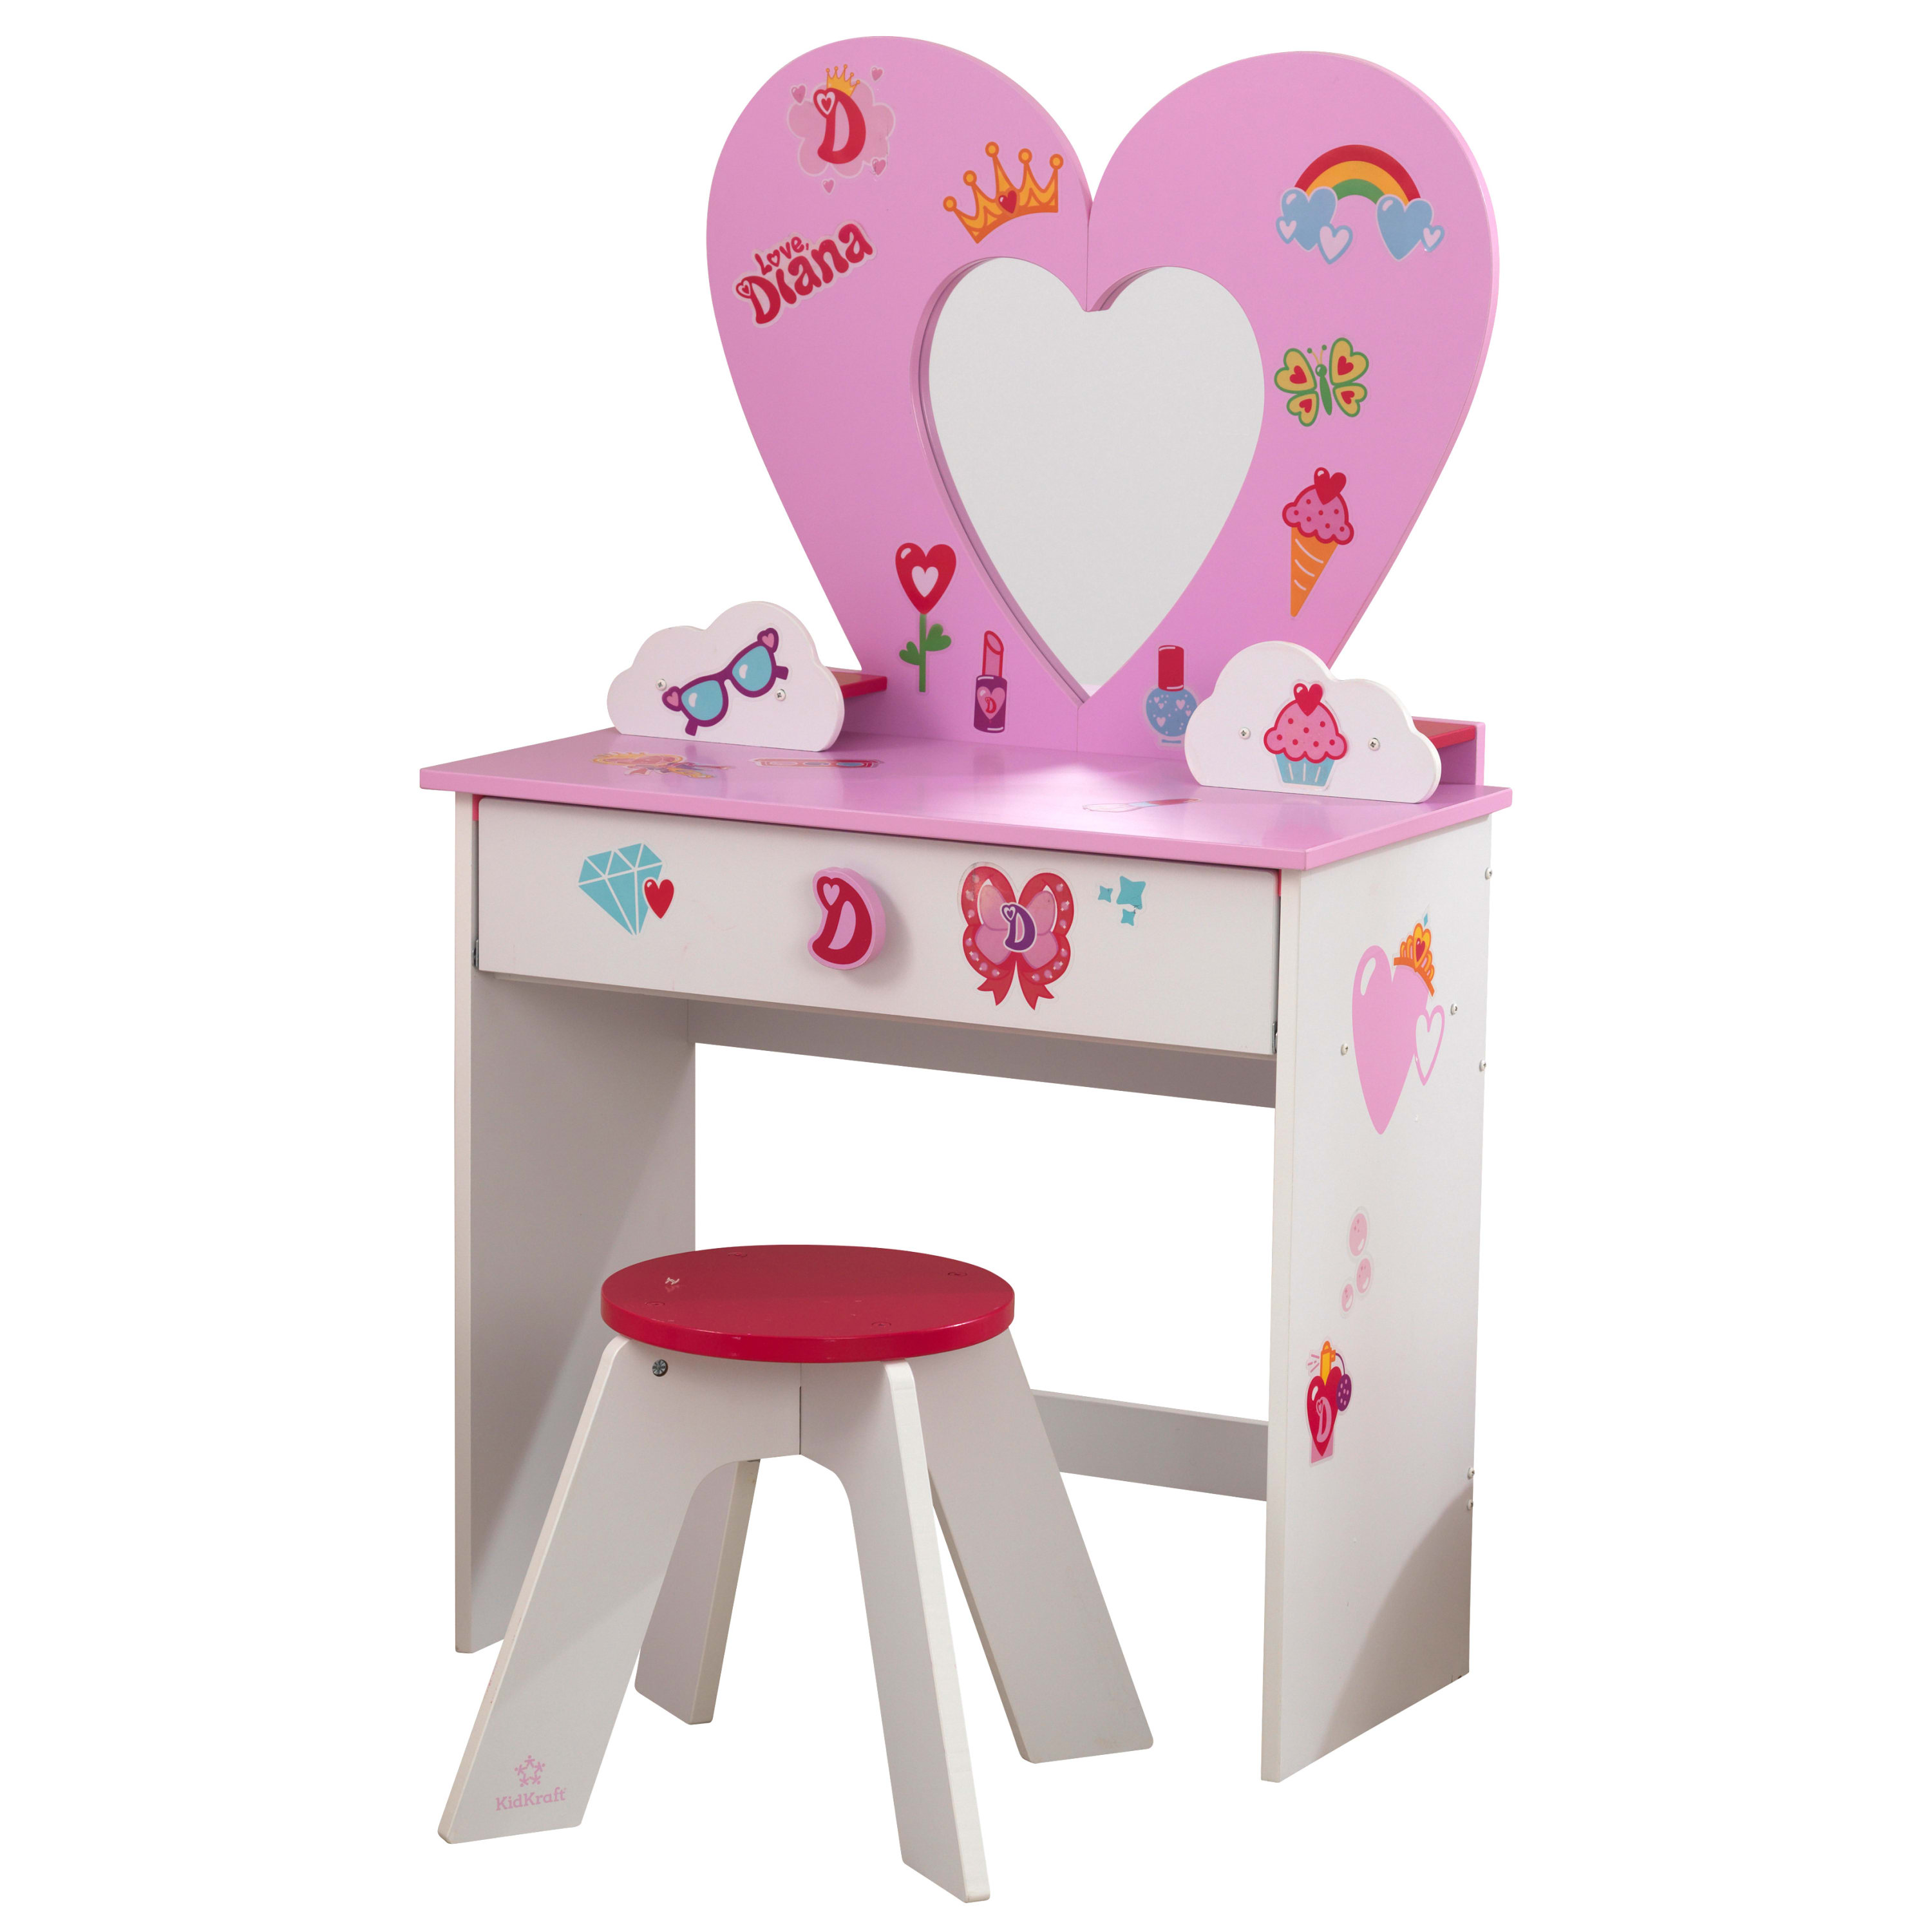 KidKraft Love, Diana™ Wood Heart Vanity Toy Set with Stool & Stickers for Personalization - image 1 of 8